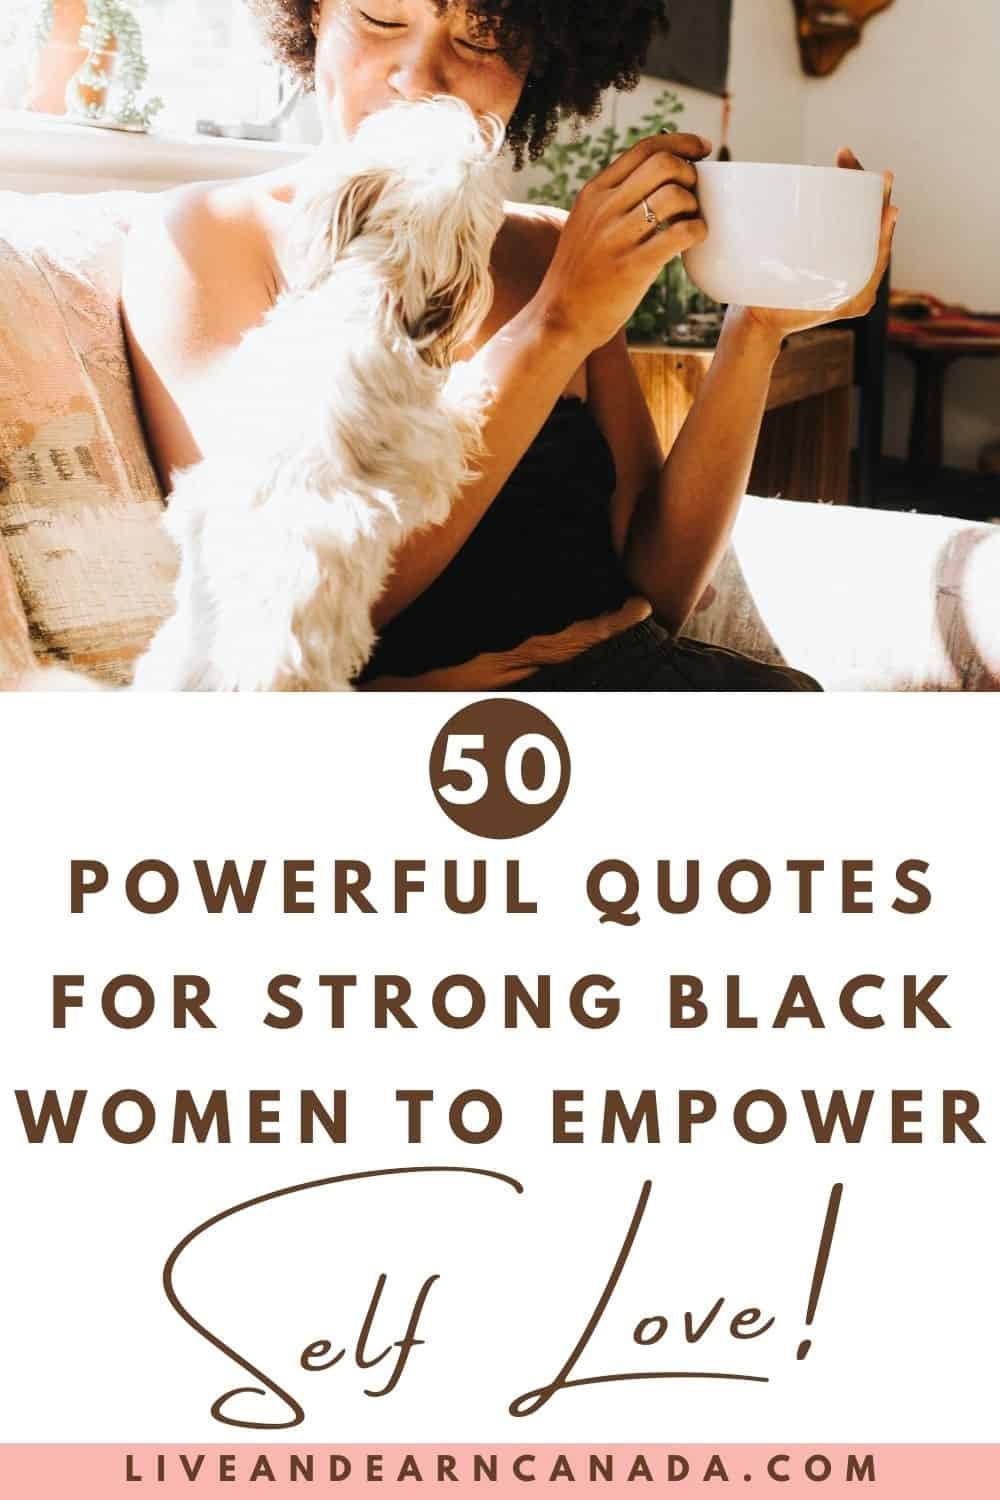 50 Powerful Quotes from Inspiring Black Women! These are inspirational, motivational, wise, and funny black women quotes, sayings, and proverbs that inspire us. 